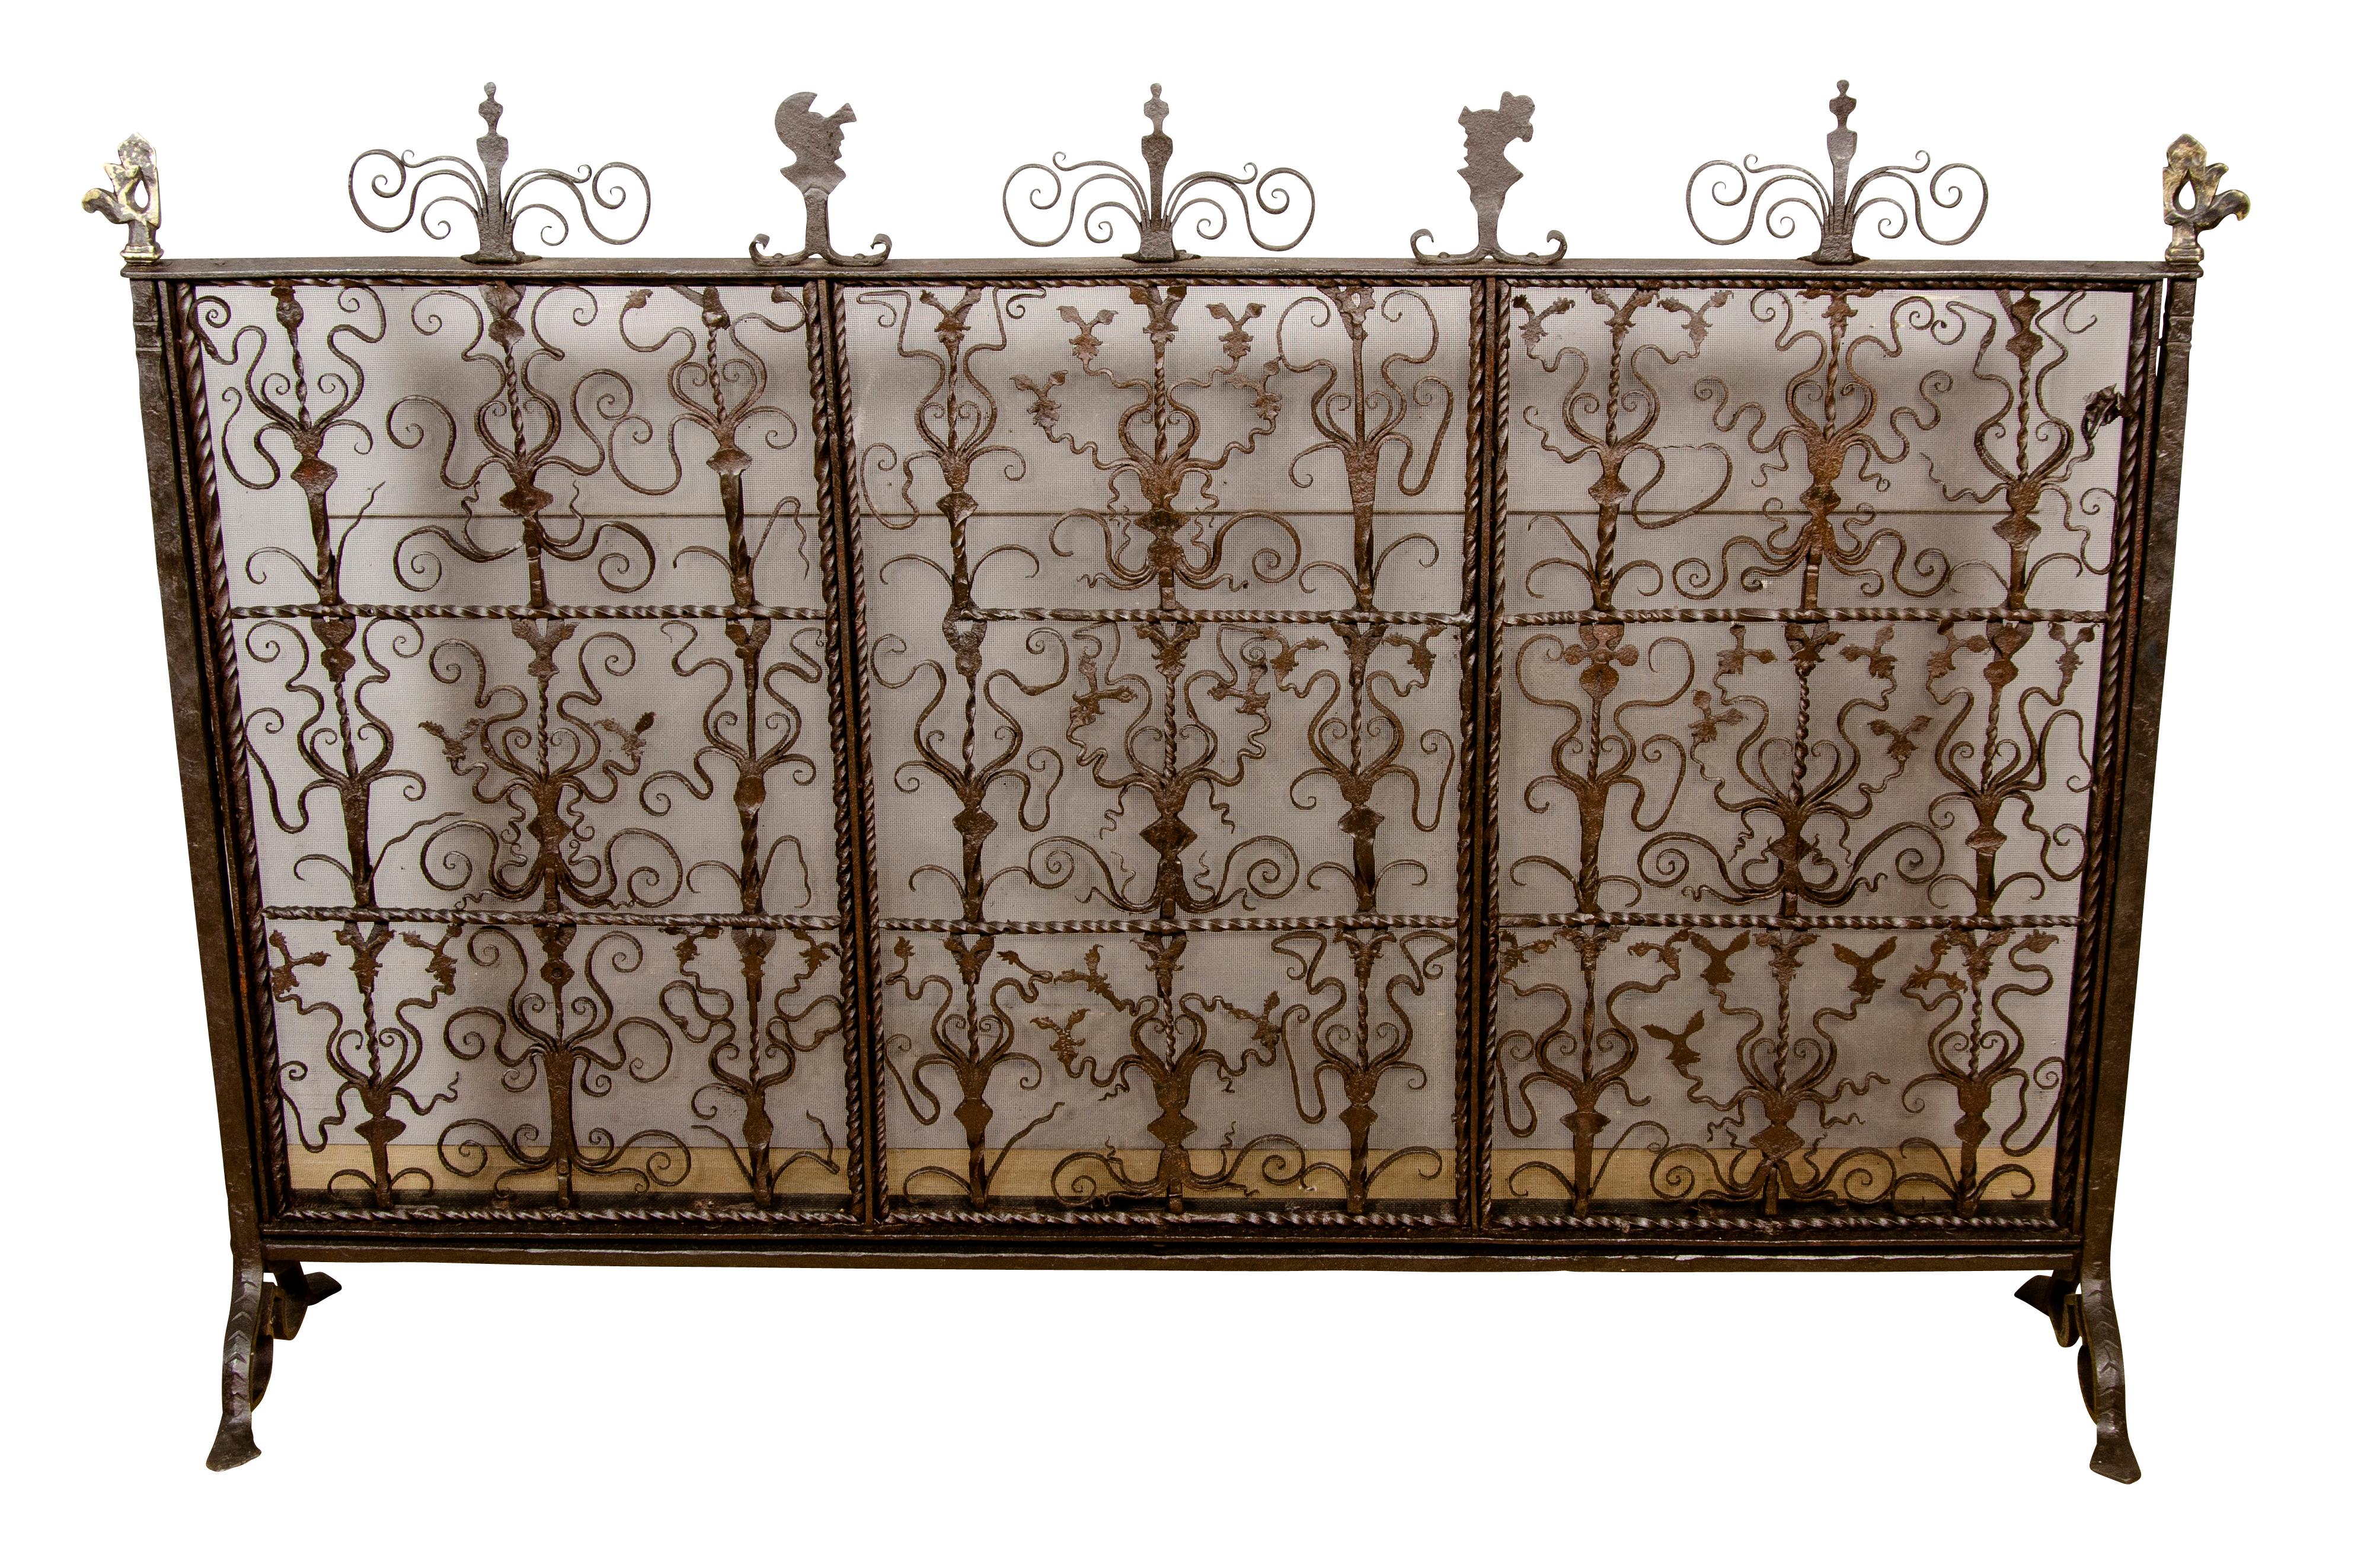 Large and grand scale wonderfully hand wrought with various forms of wrought decoration .